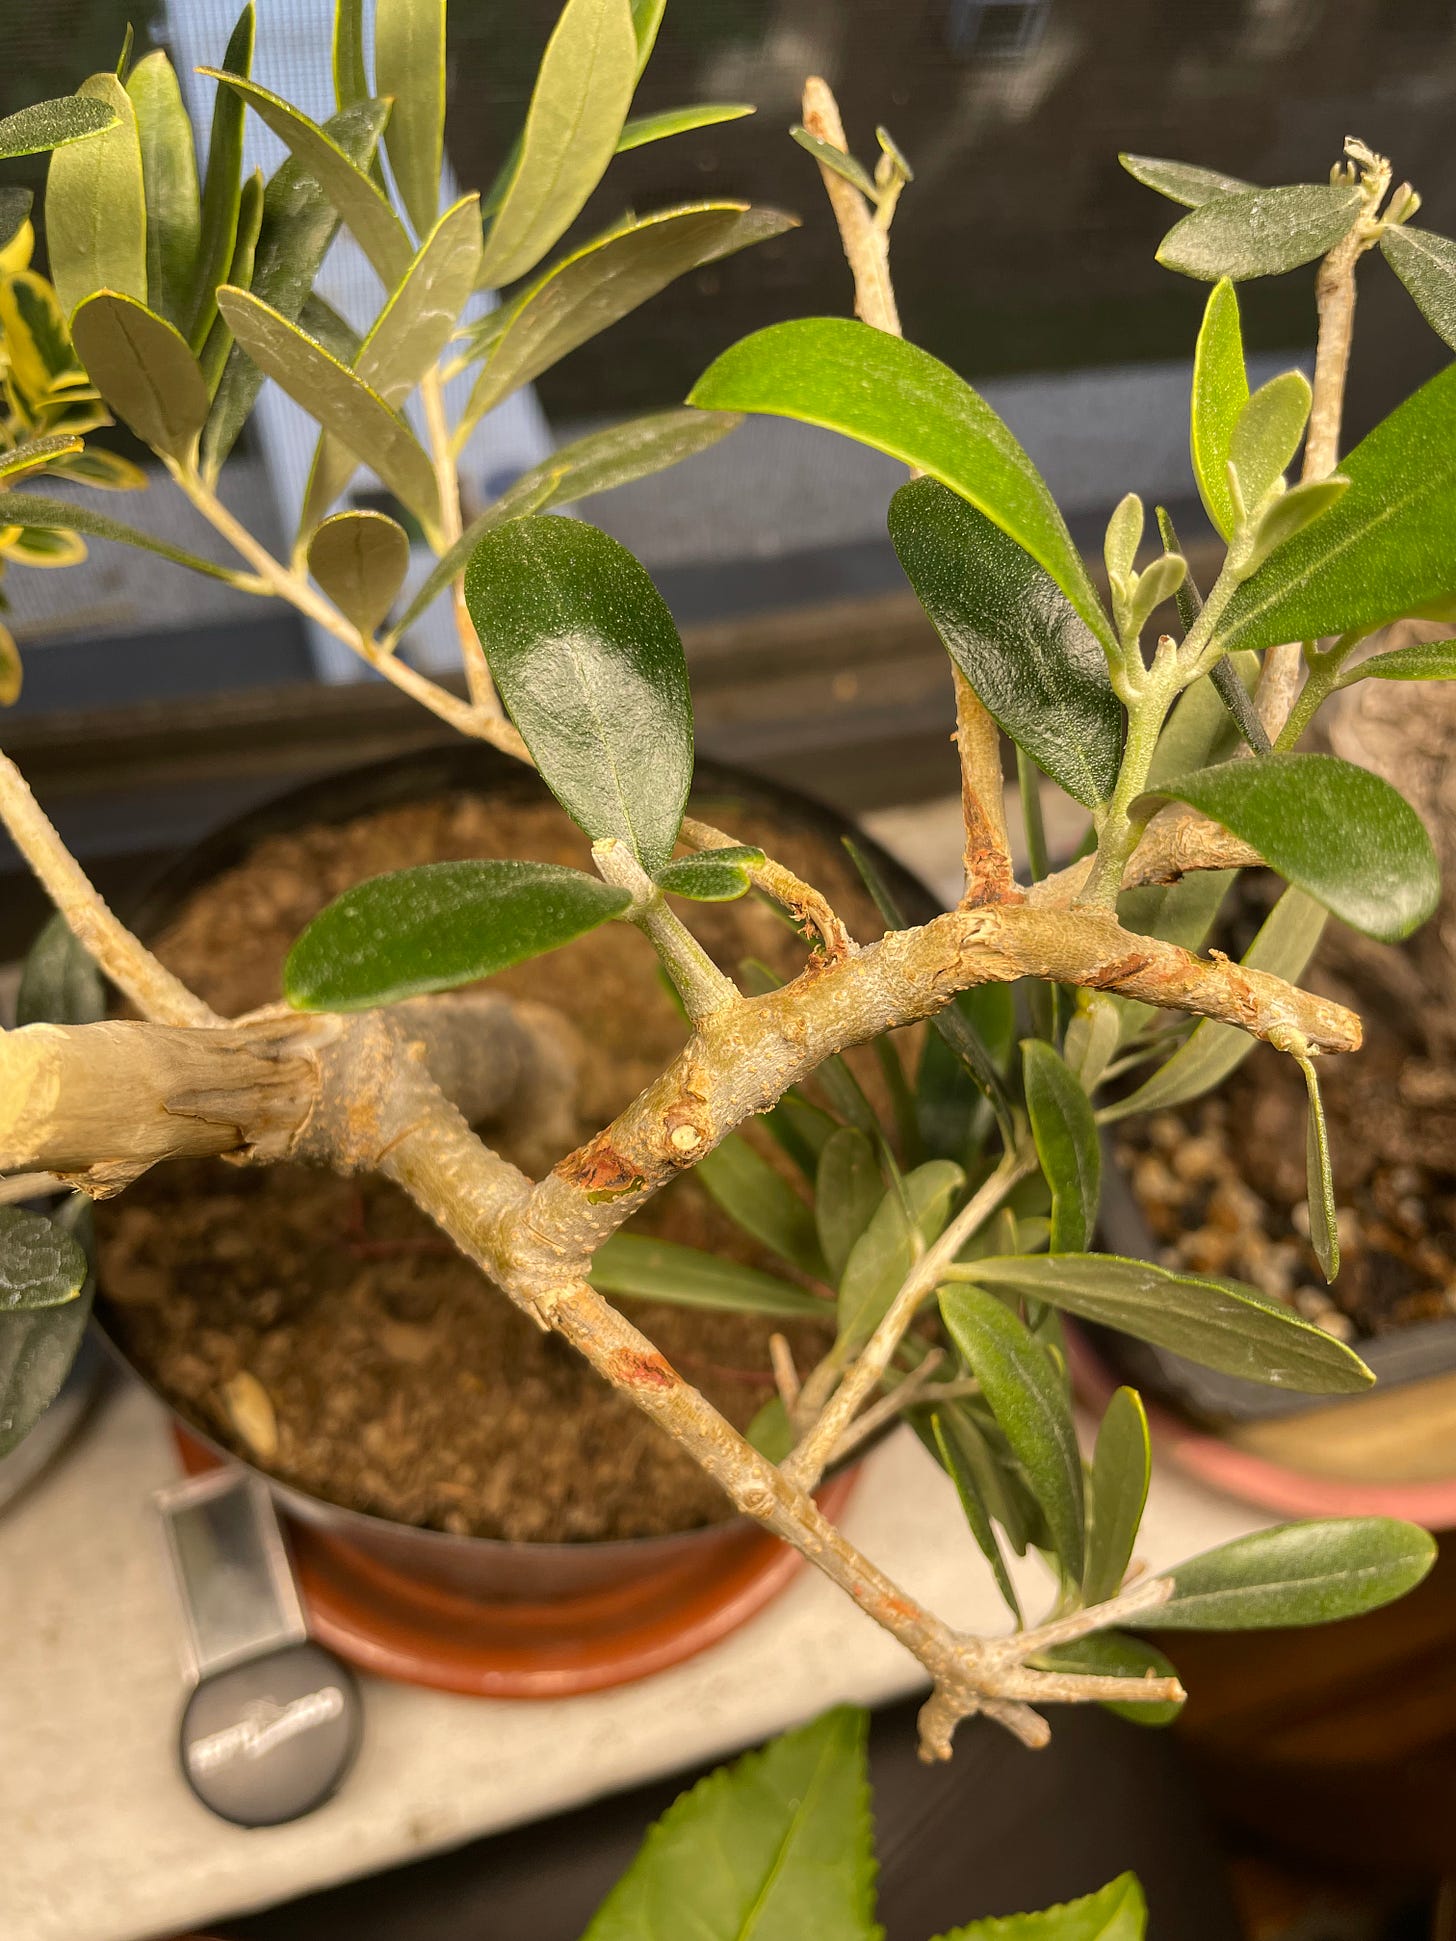 ID: Photo of olive pre bonsai branches showing rusty colored scars and damage from copper wire.